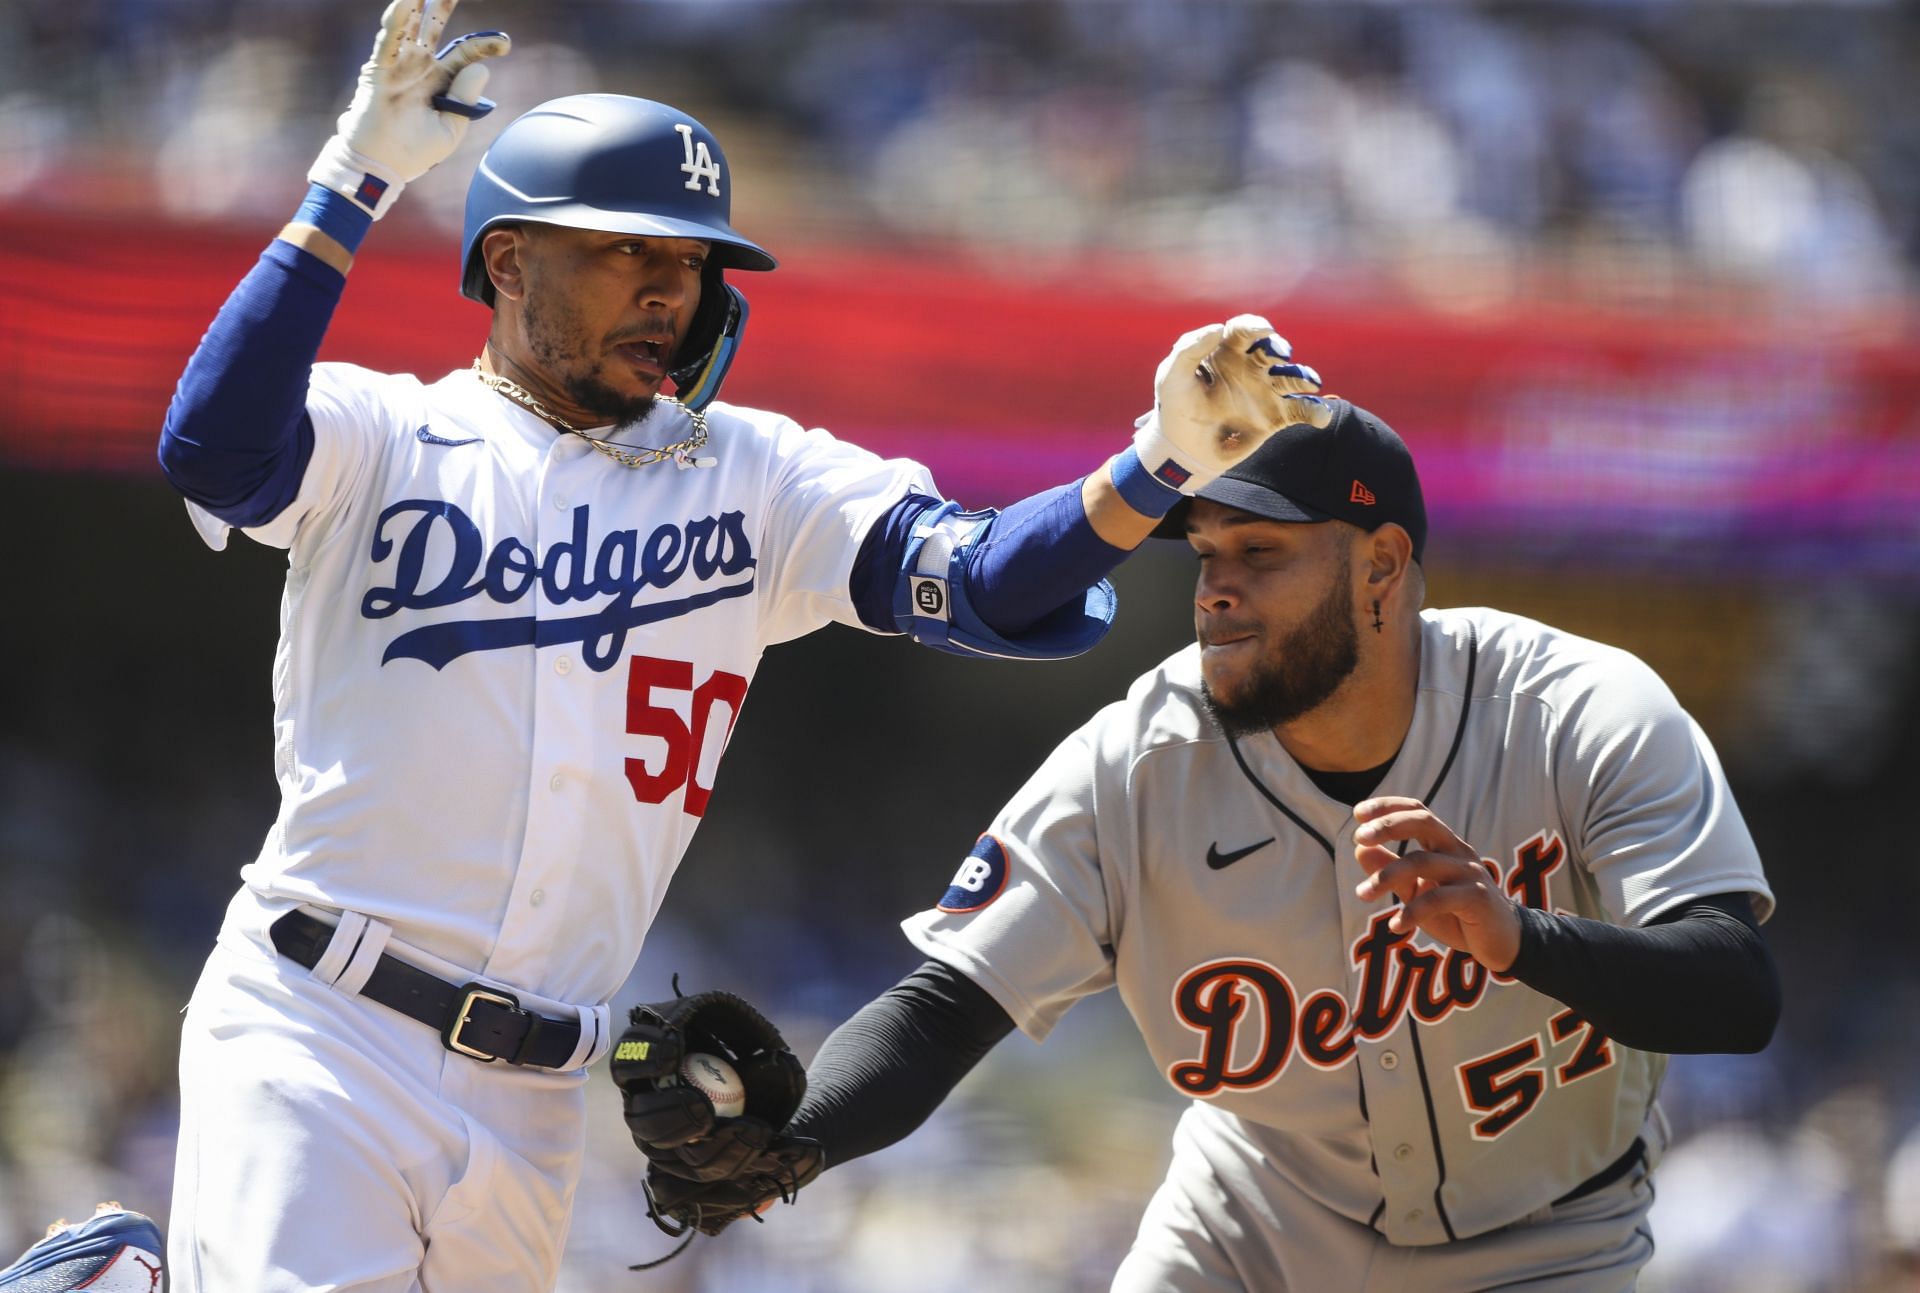 Los Angeles Dodgers outfielder Mookie Betts Mookie Betts leads the Dodgers in hits over his last 15 games.